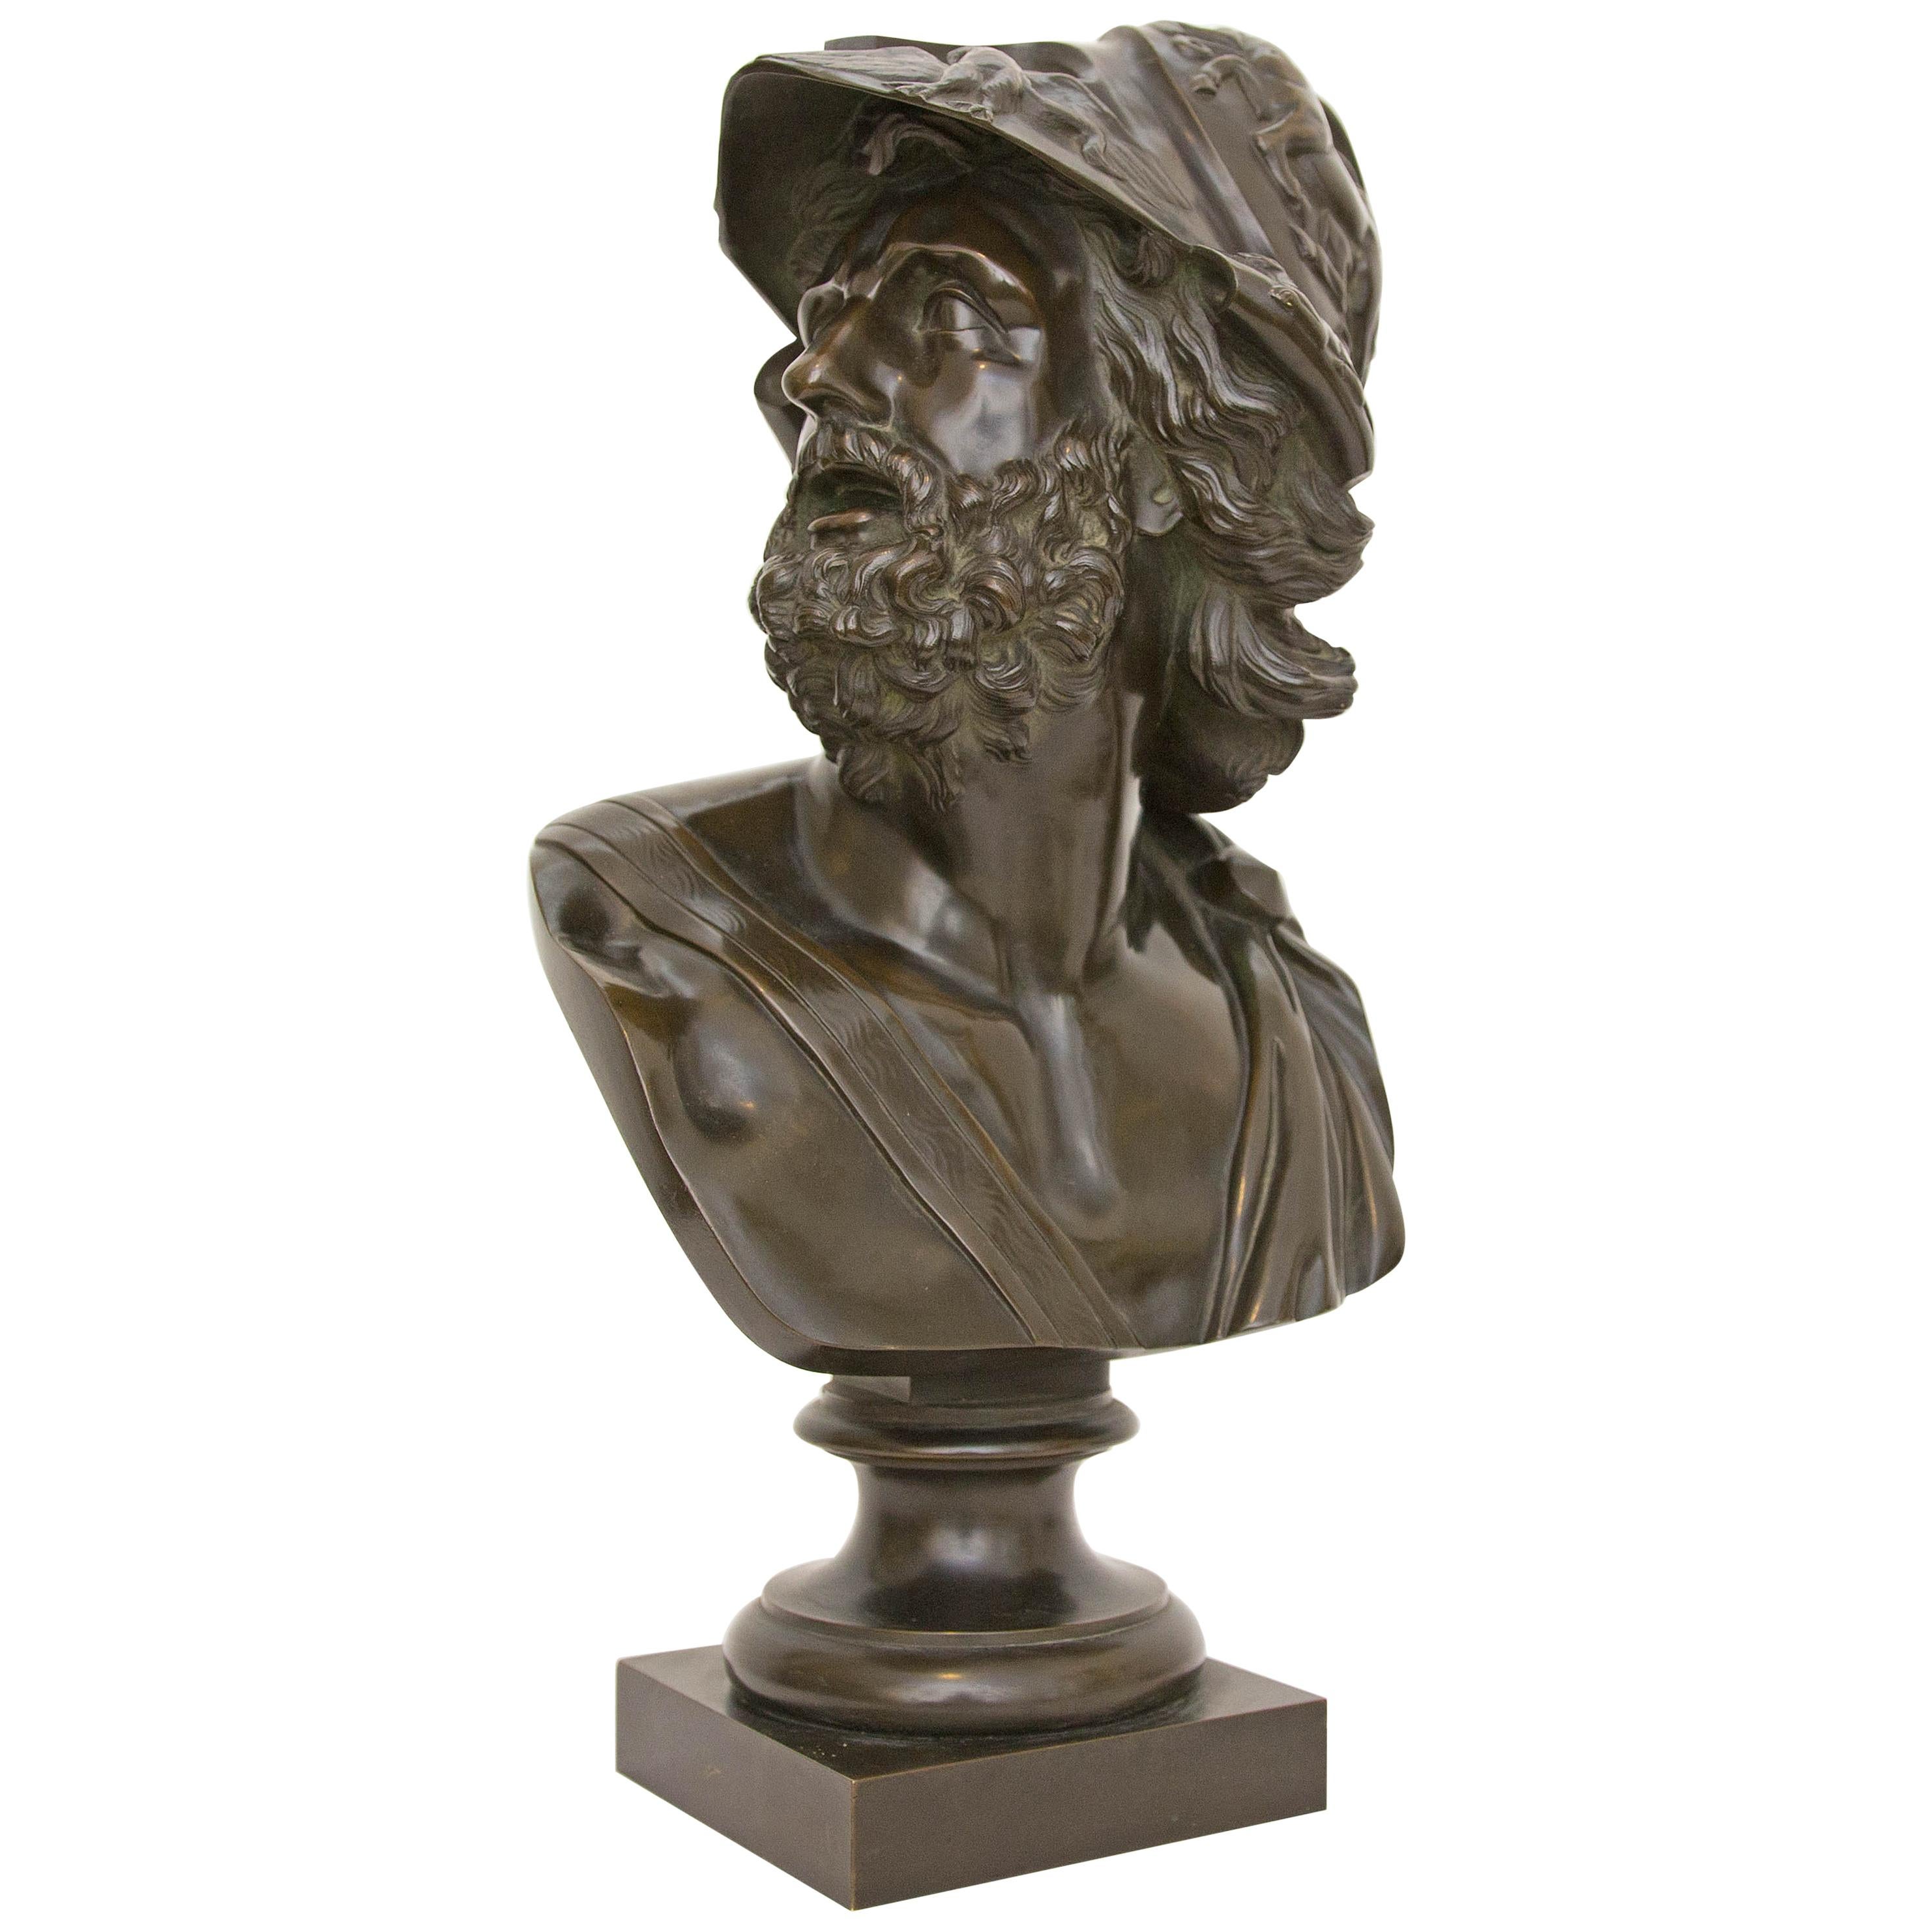 19th century bronze bust Menelaus mythological king of Sparta. A fine casting with rich patina. In Greek mythology, Menelaus (/?m?n?'le??s/; Greek: ?e???a??, Menelaos, from µ???? 